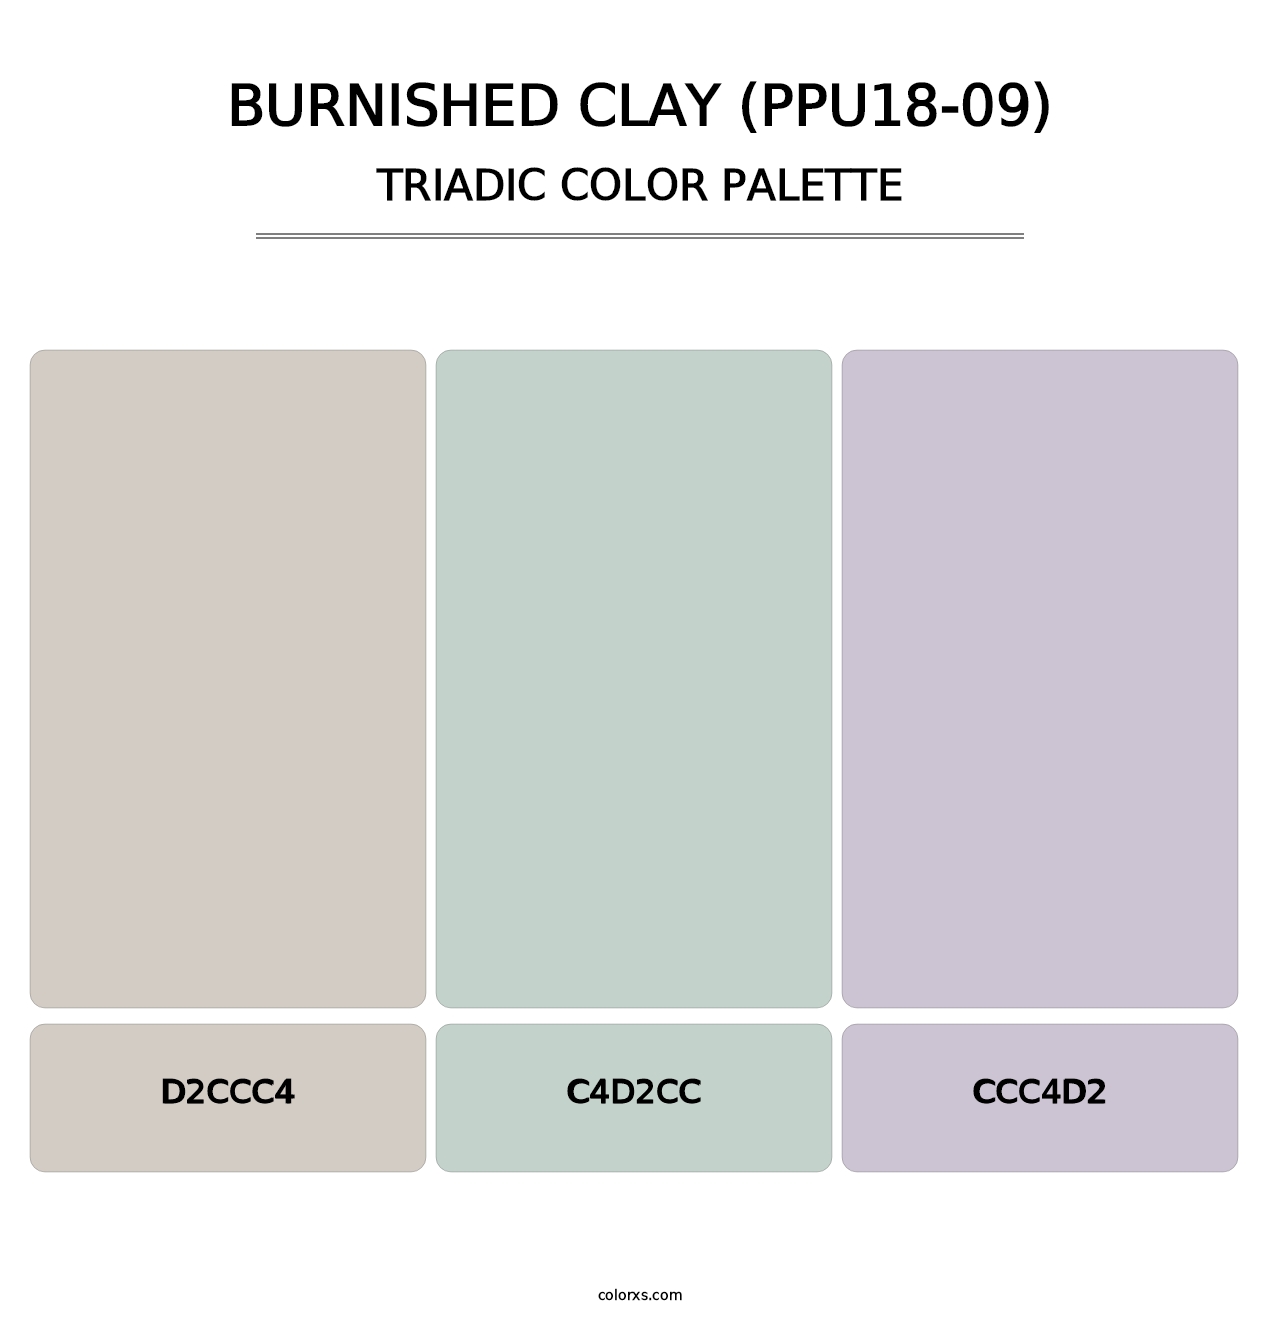 Burnished Clay (PPU18-09) - Triadic Color Palette